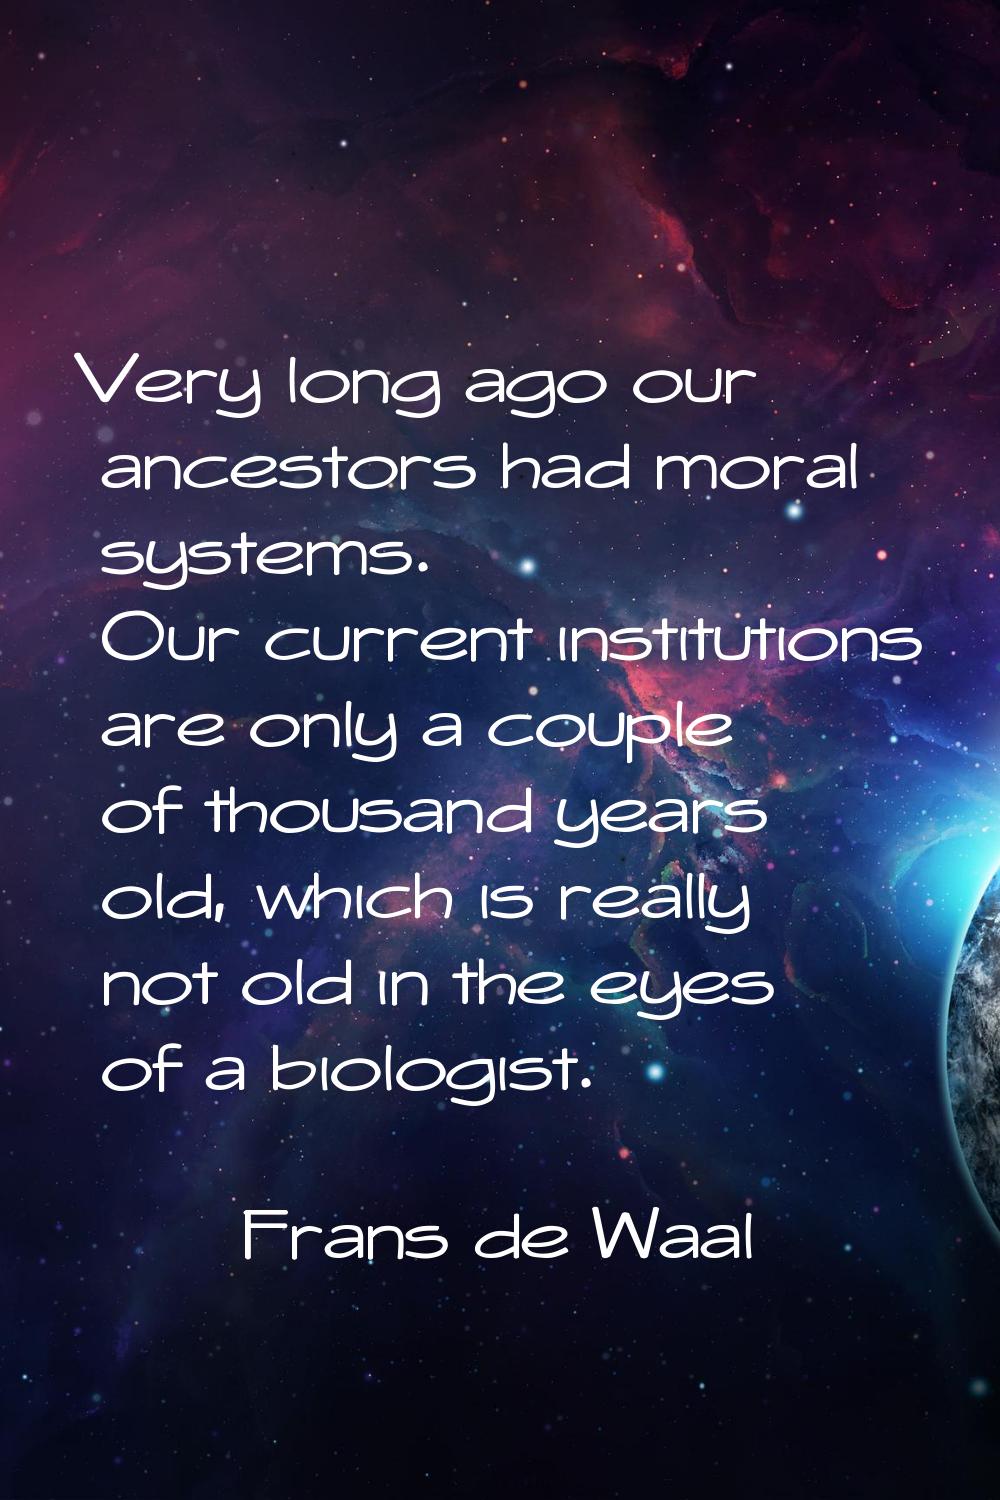 Very long ago our ancestors had moral systems. Our current institutions are only a couple of thousa